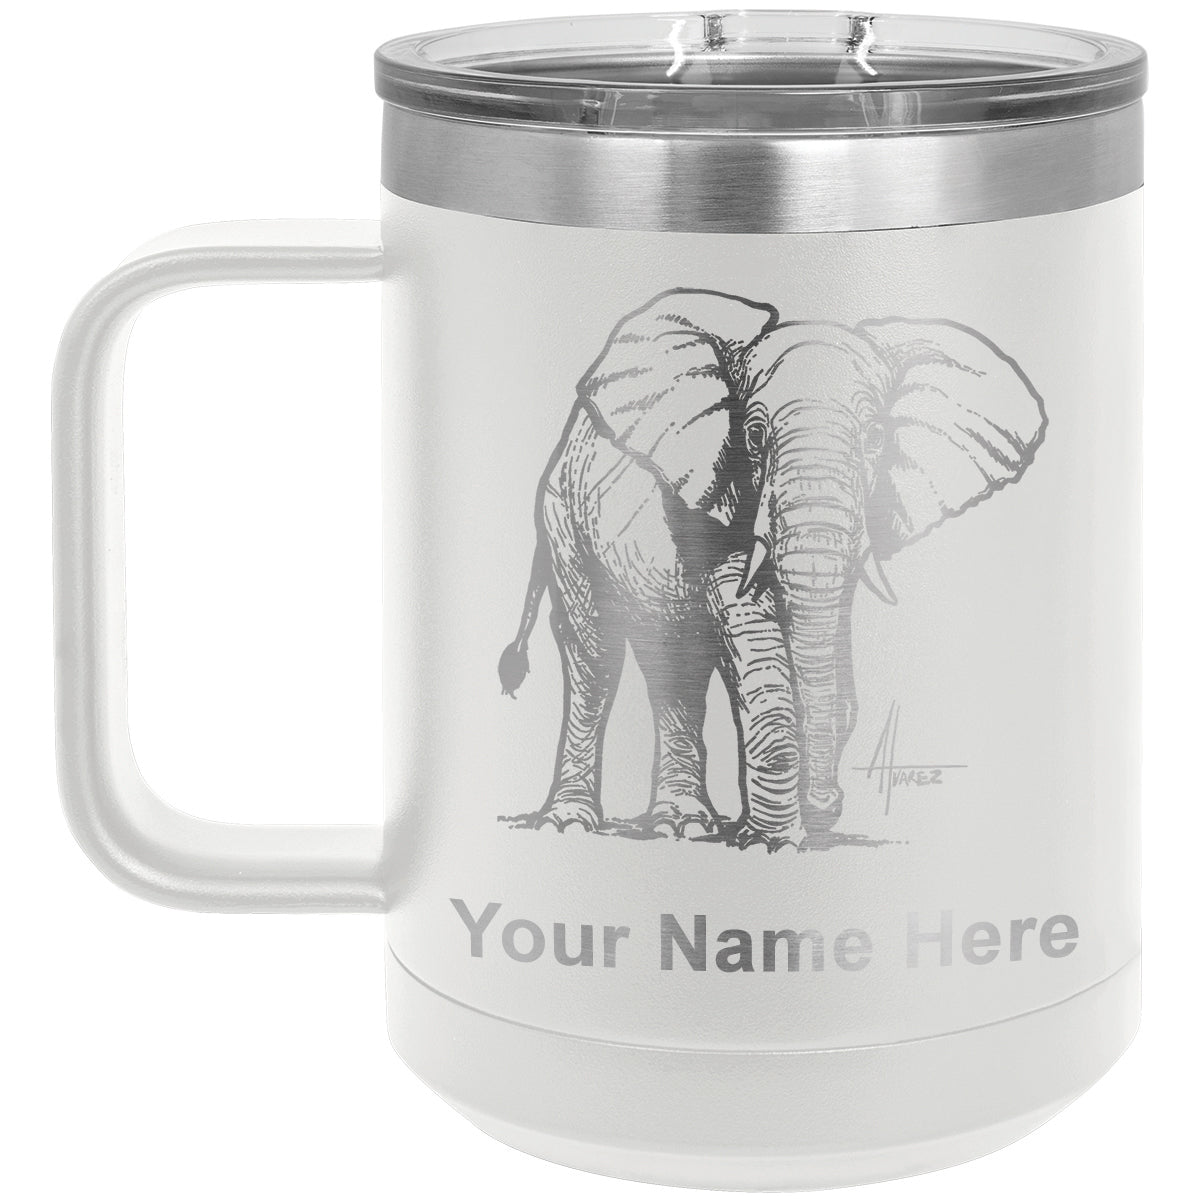 15oz Vacuum Insulated Coffee Mug, African Elephant, Personalized Engraving Included